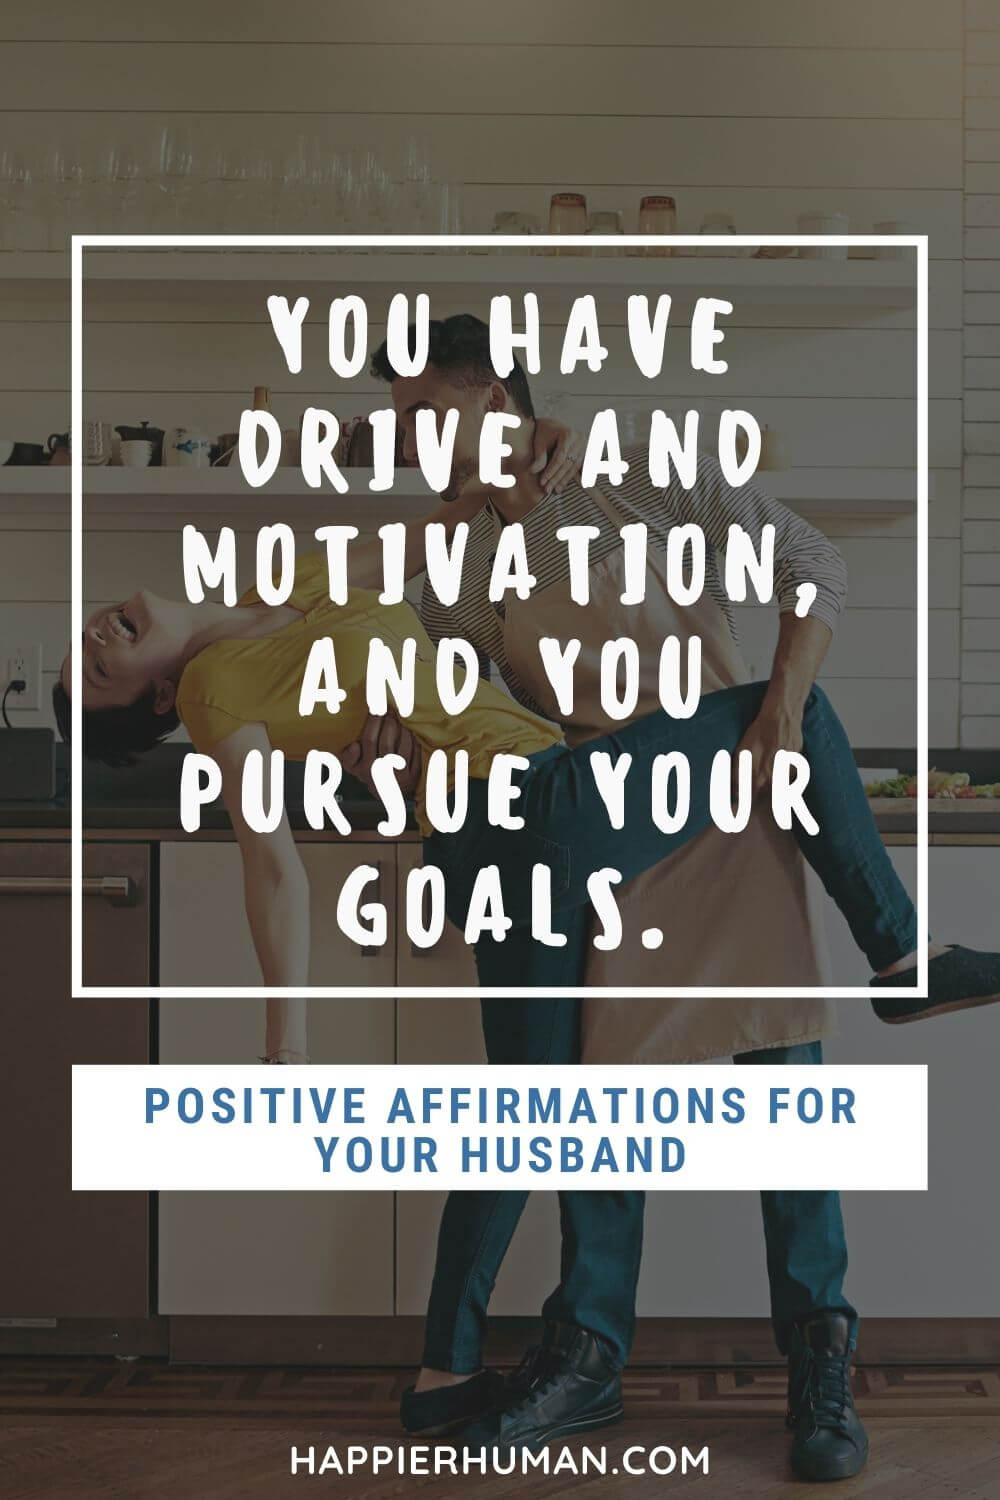 Affirmations for Husband - You have drive and motivation, and you pursue your goals. | positive affirmations for husband and wife | free affirmations for husband | affirmations of love for husband